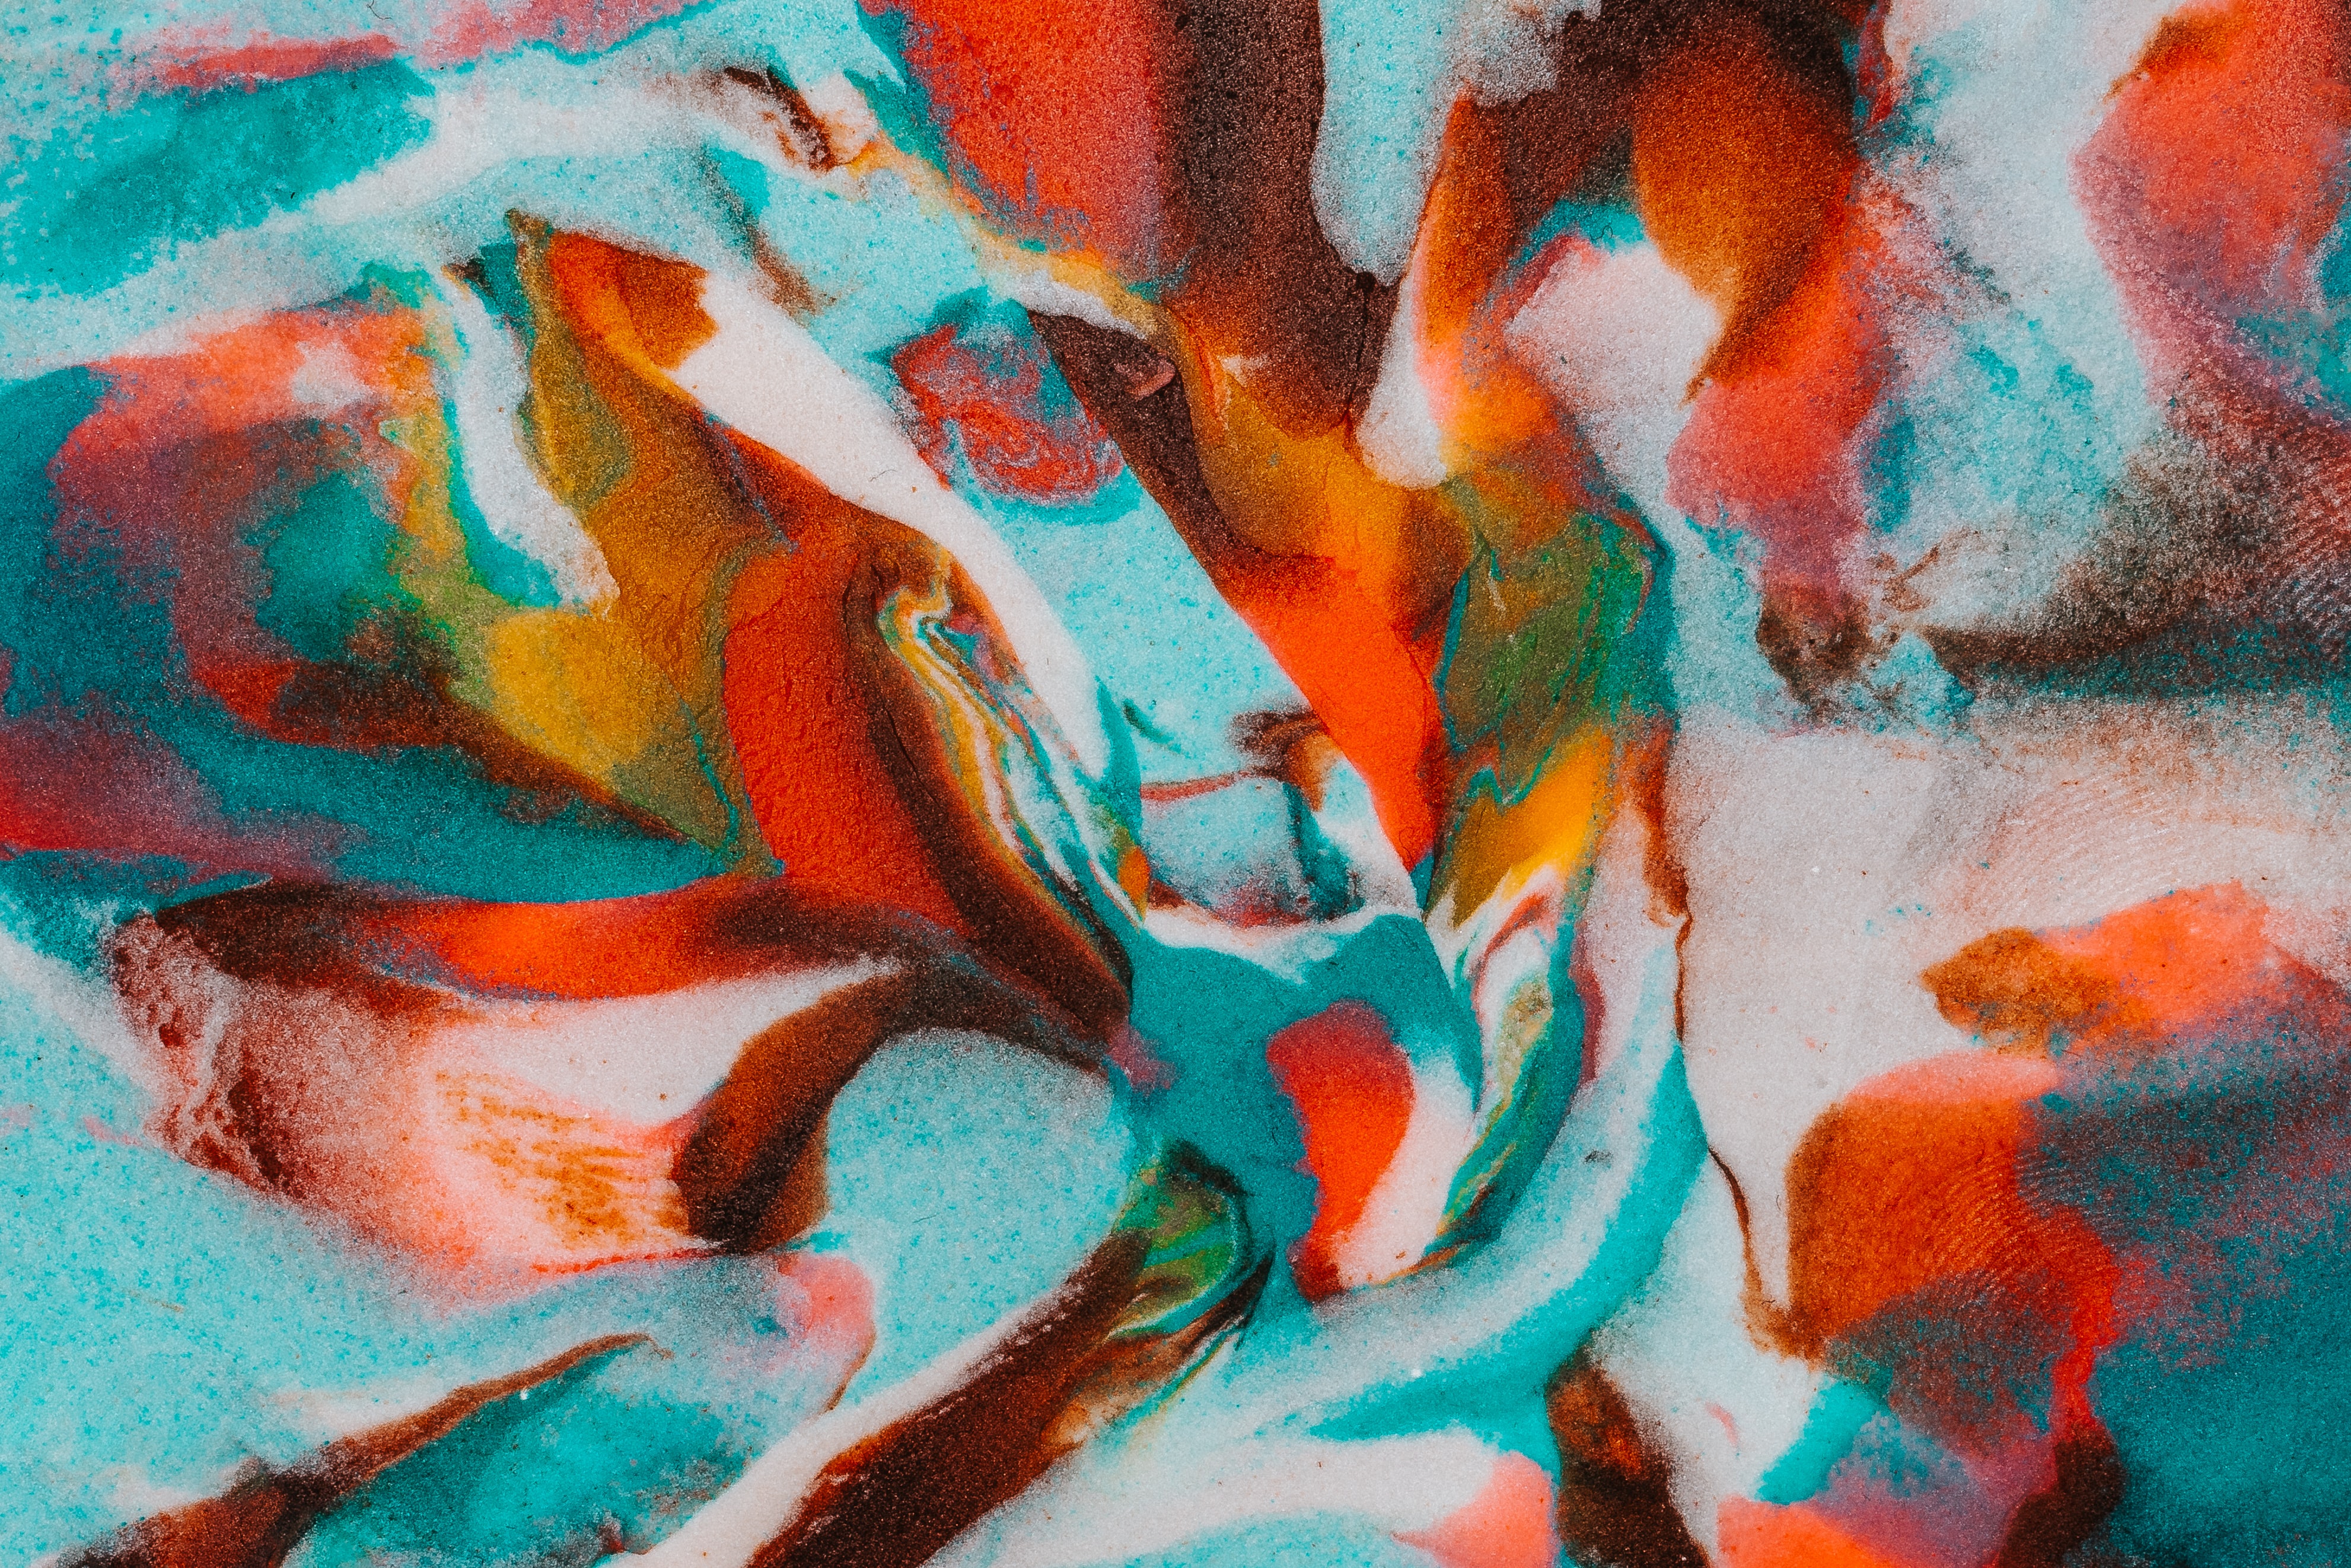 Wallpaper Full HD motley, abstract, multicolored, paint, colors, color, stains, spots